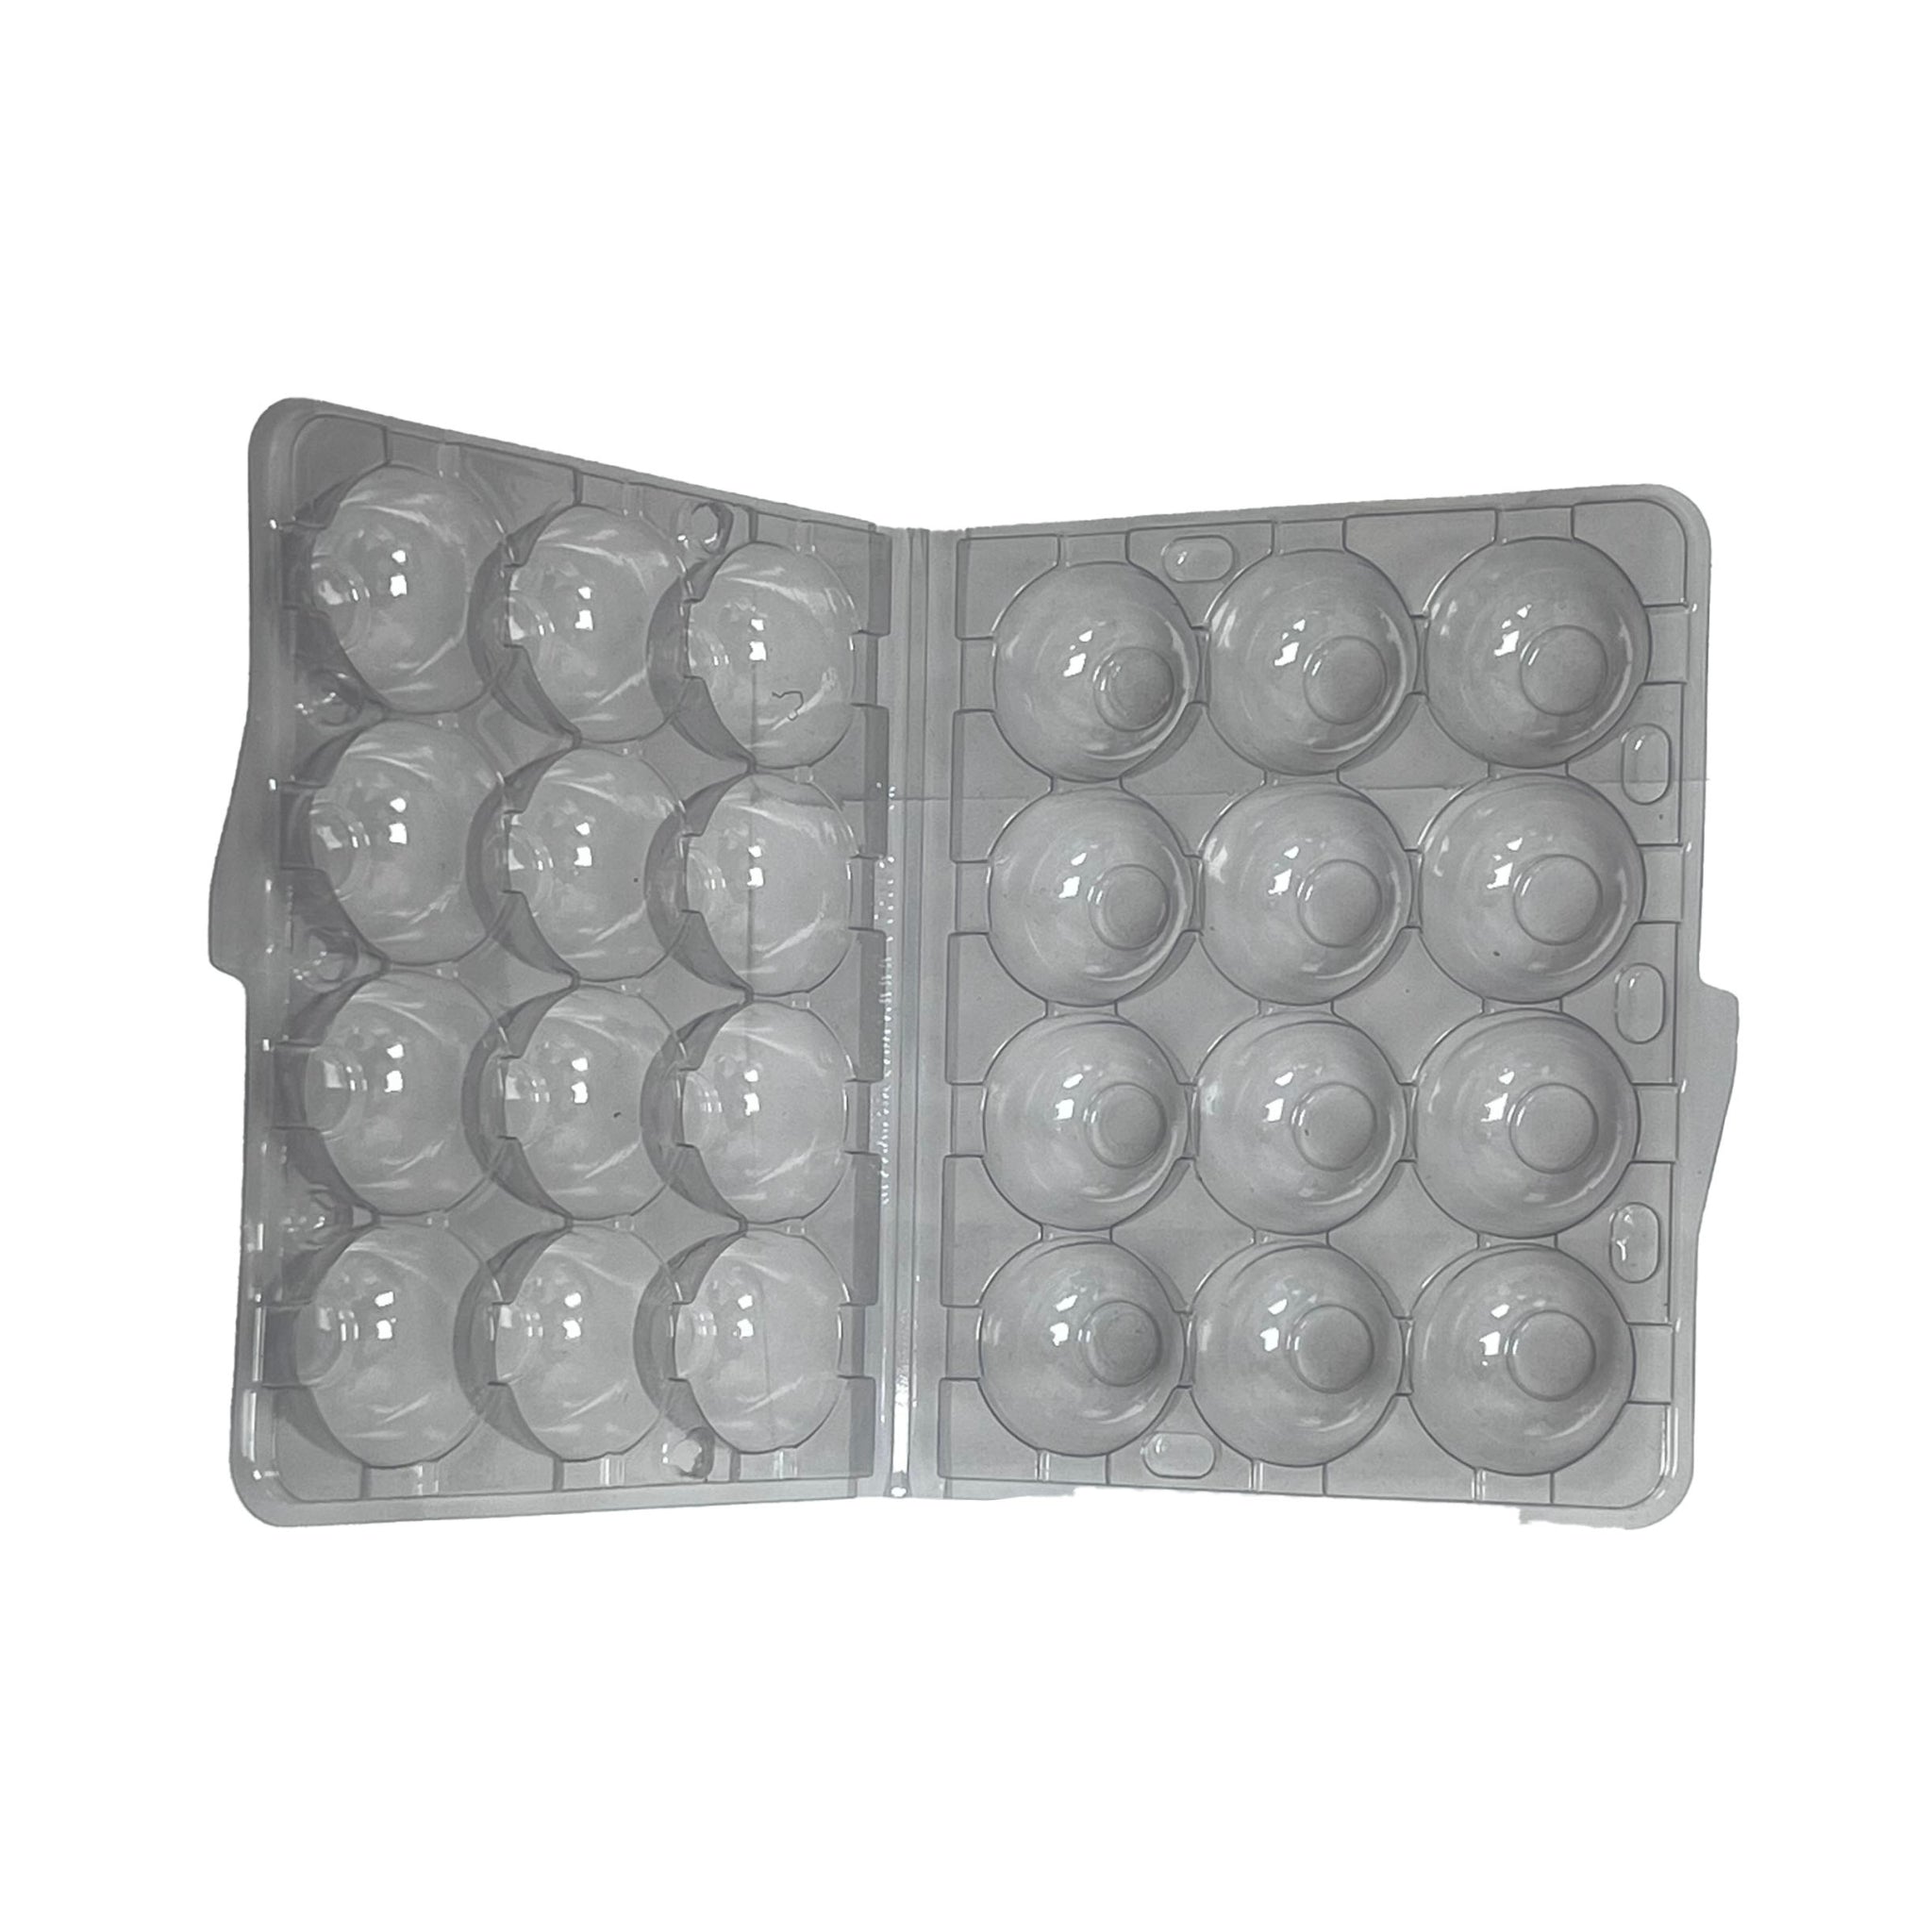 Hatching Time Quail Egg 12 count carton. Above view of Egg carton is shown with the lid open showing 12 spaces for quail eggs.